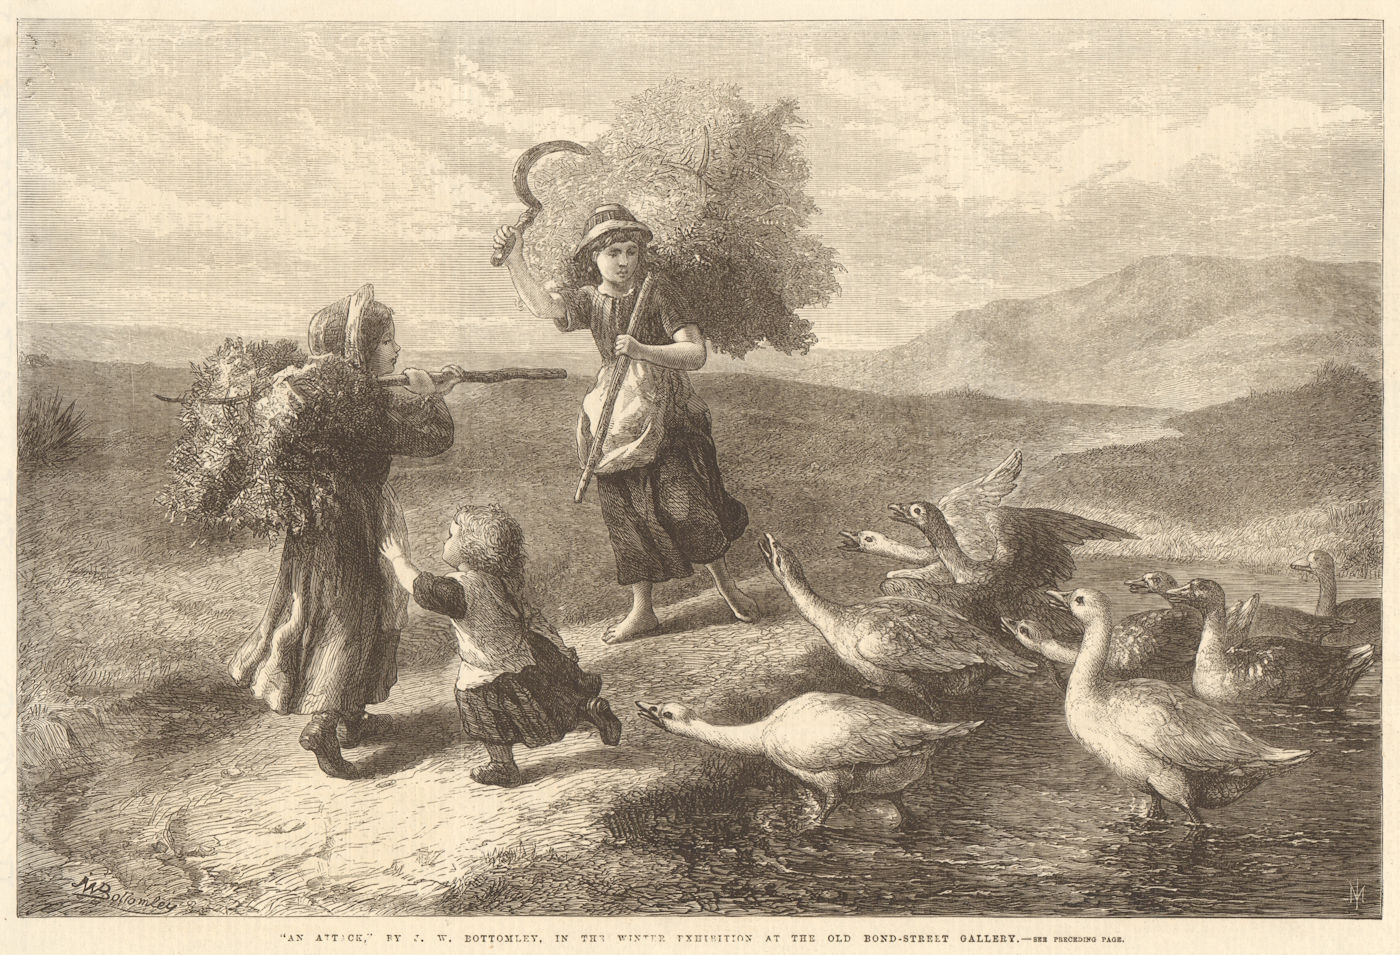 "An attack", by J. W. Bottomley. Children. Farming Geese 1869 old print